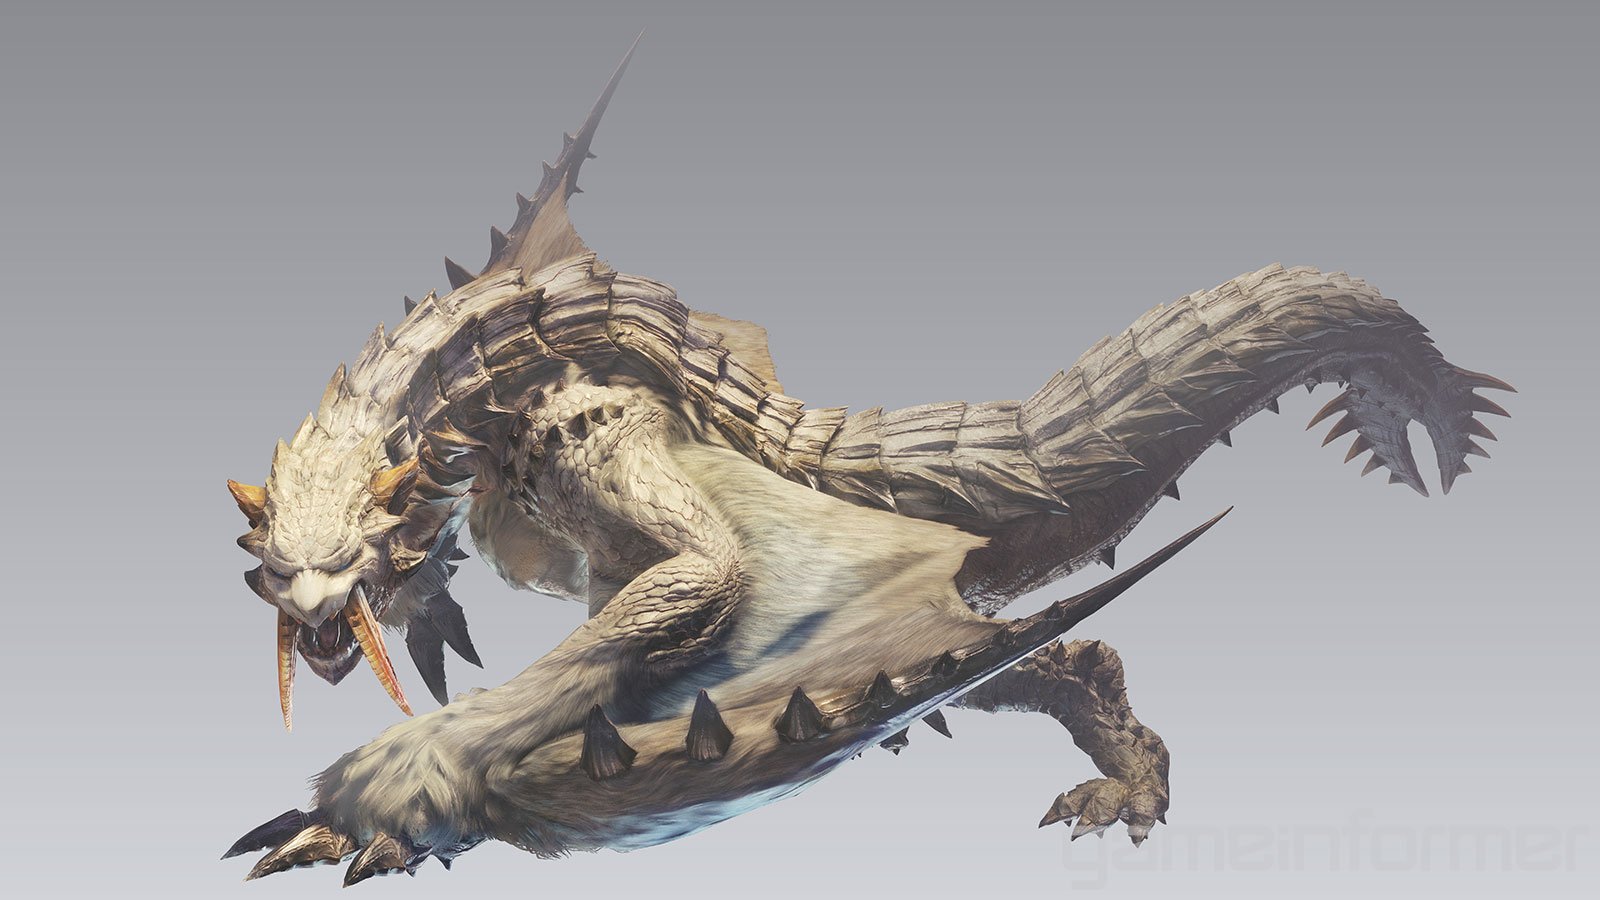 barioth-large-monster-icerborne-mhw-wiki-guide